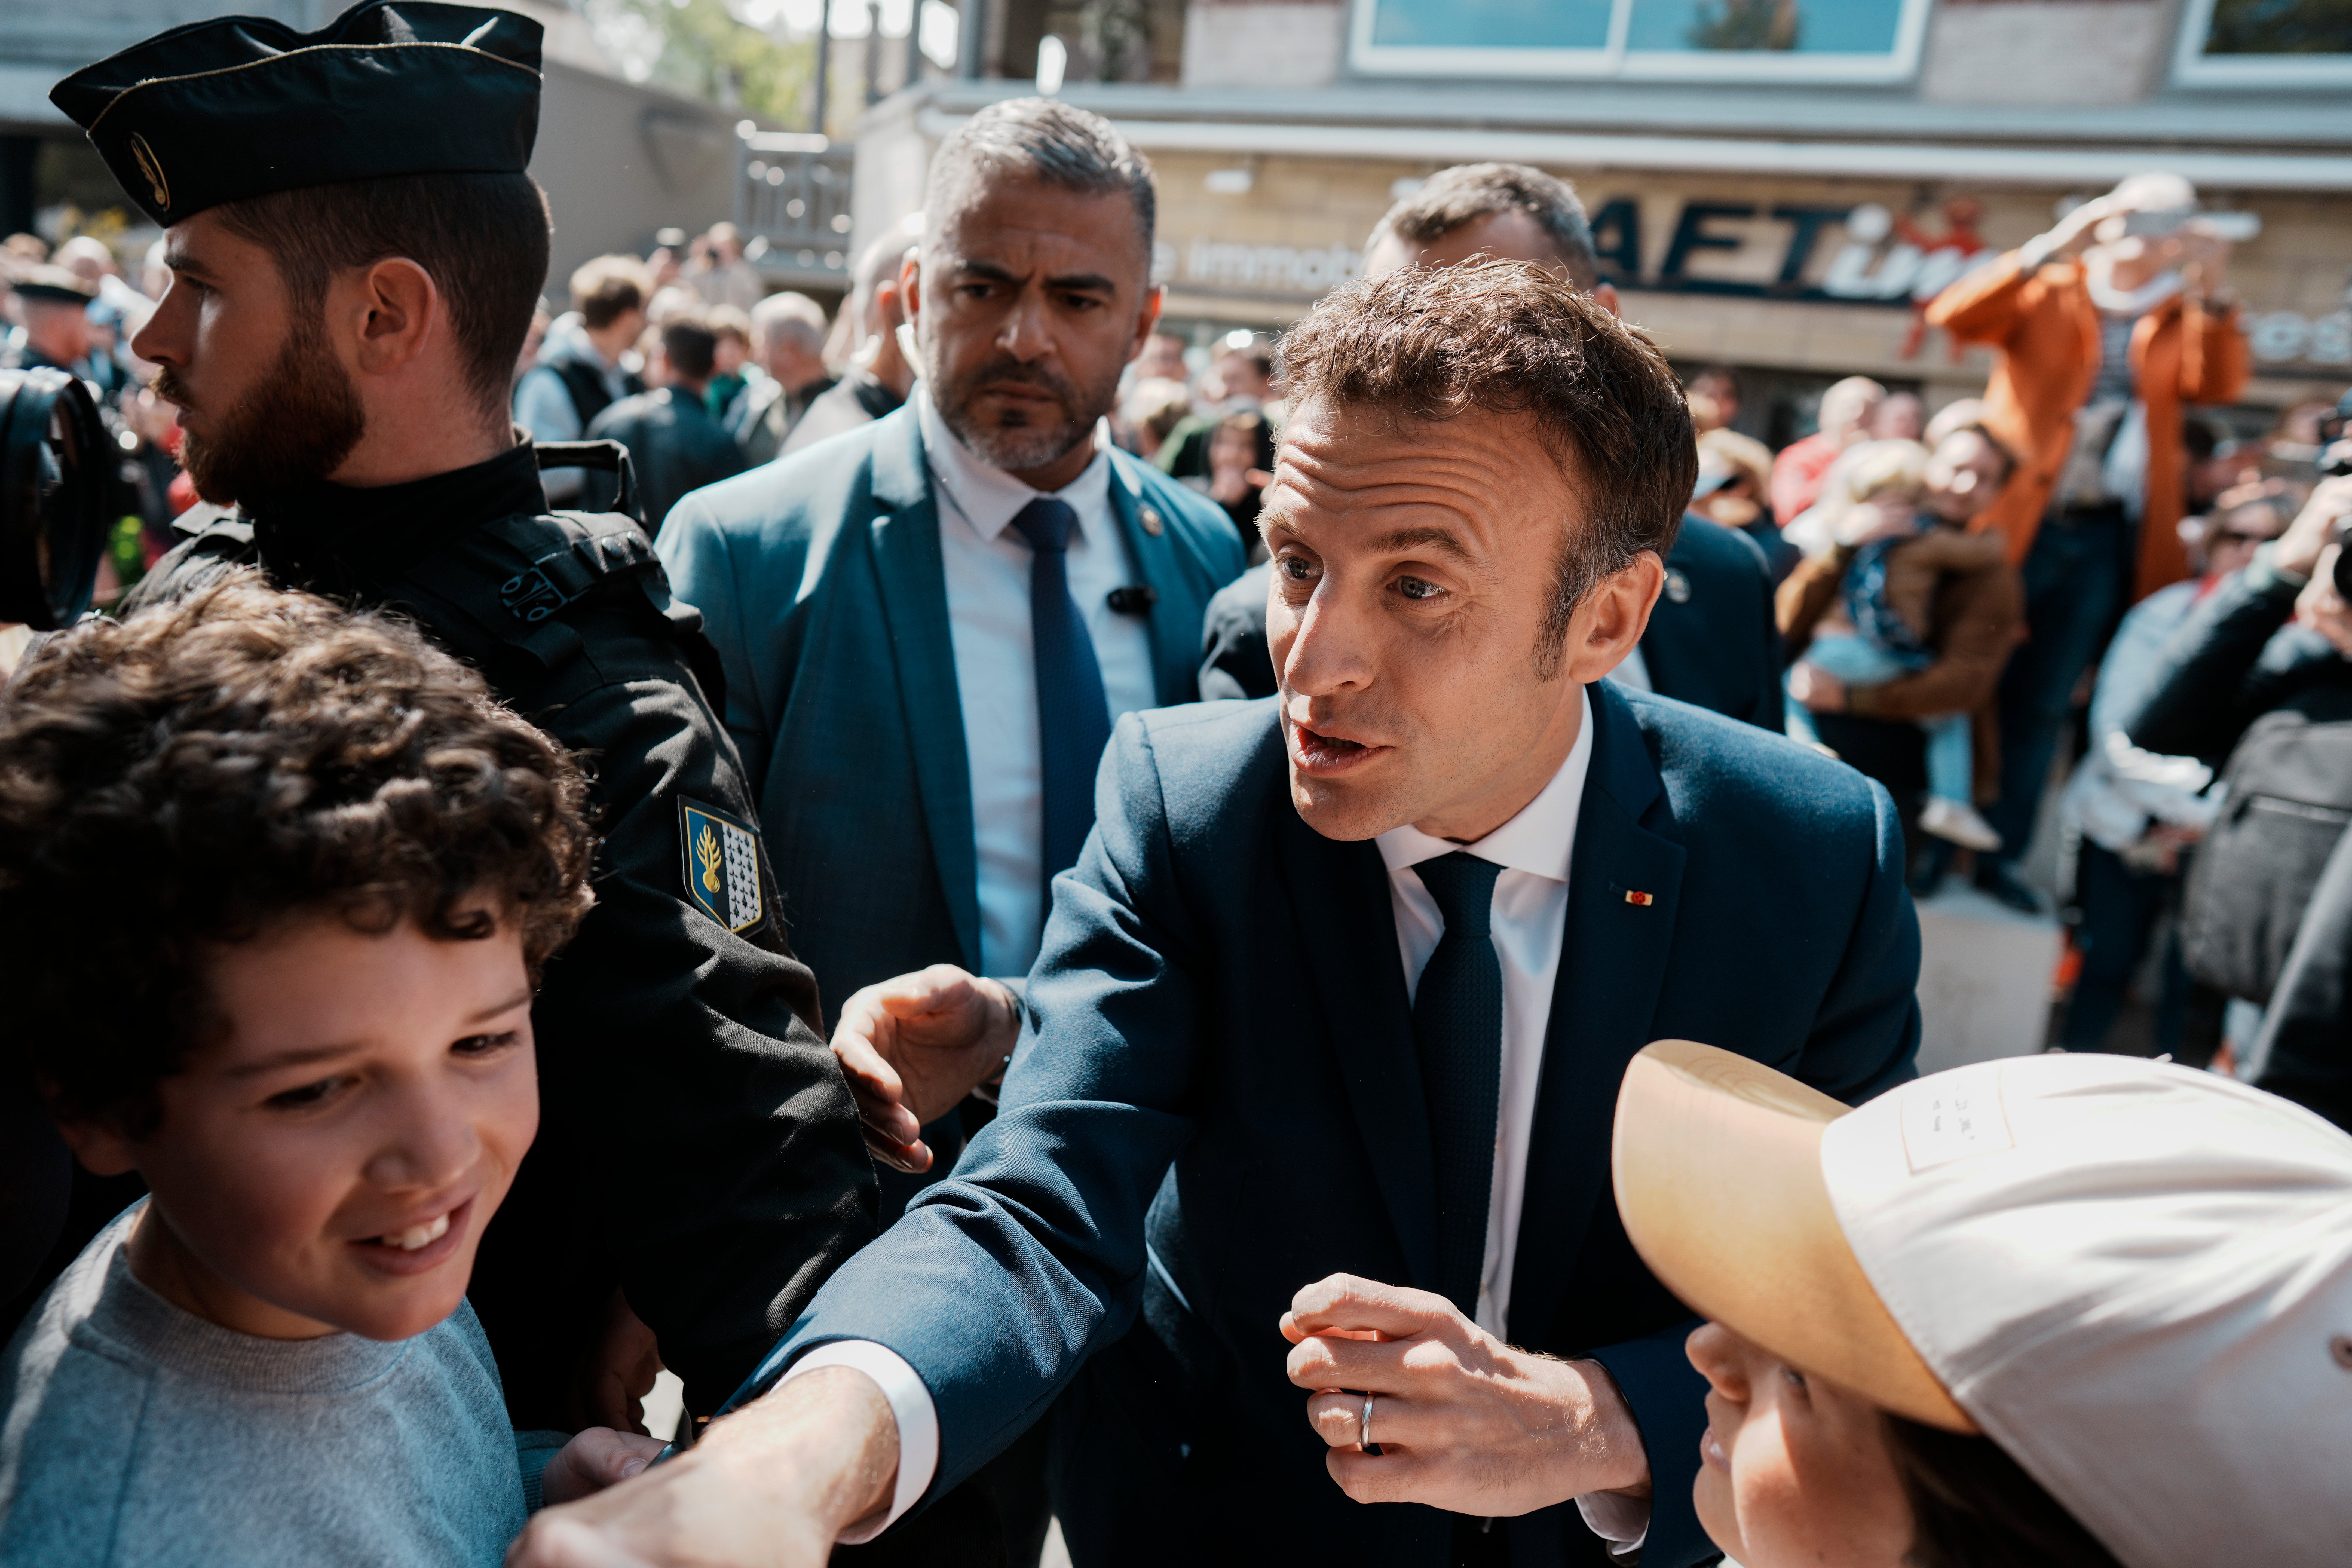 Emmanuel Macron greets well-wishes near a polling station in Le Touquet, northern France, on Sunday